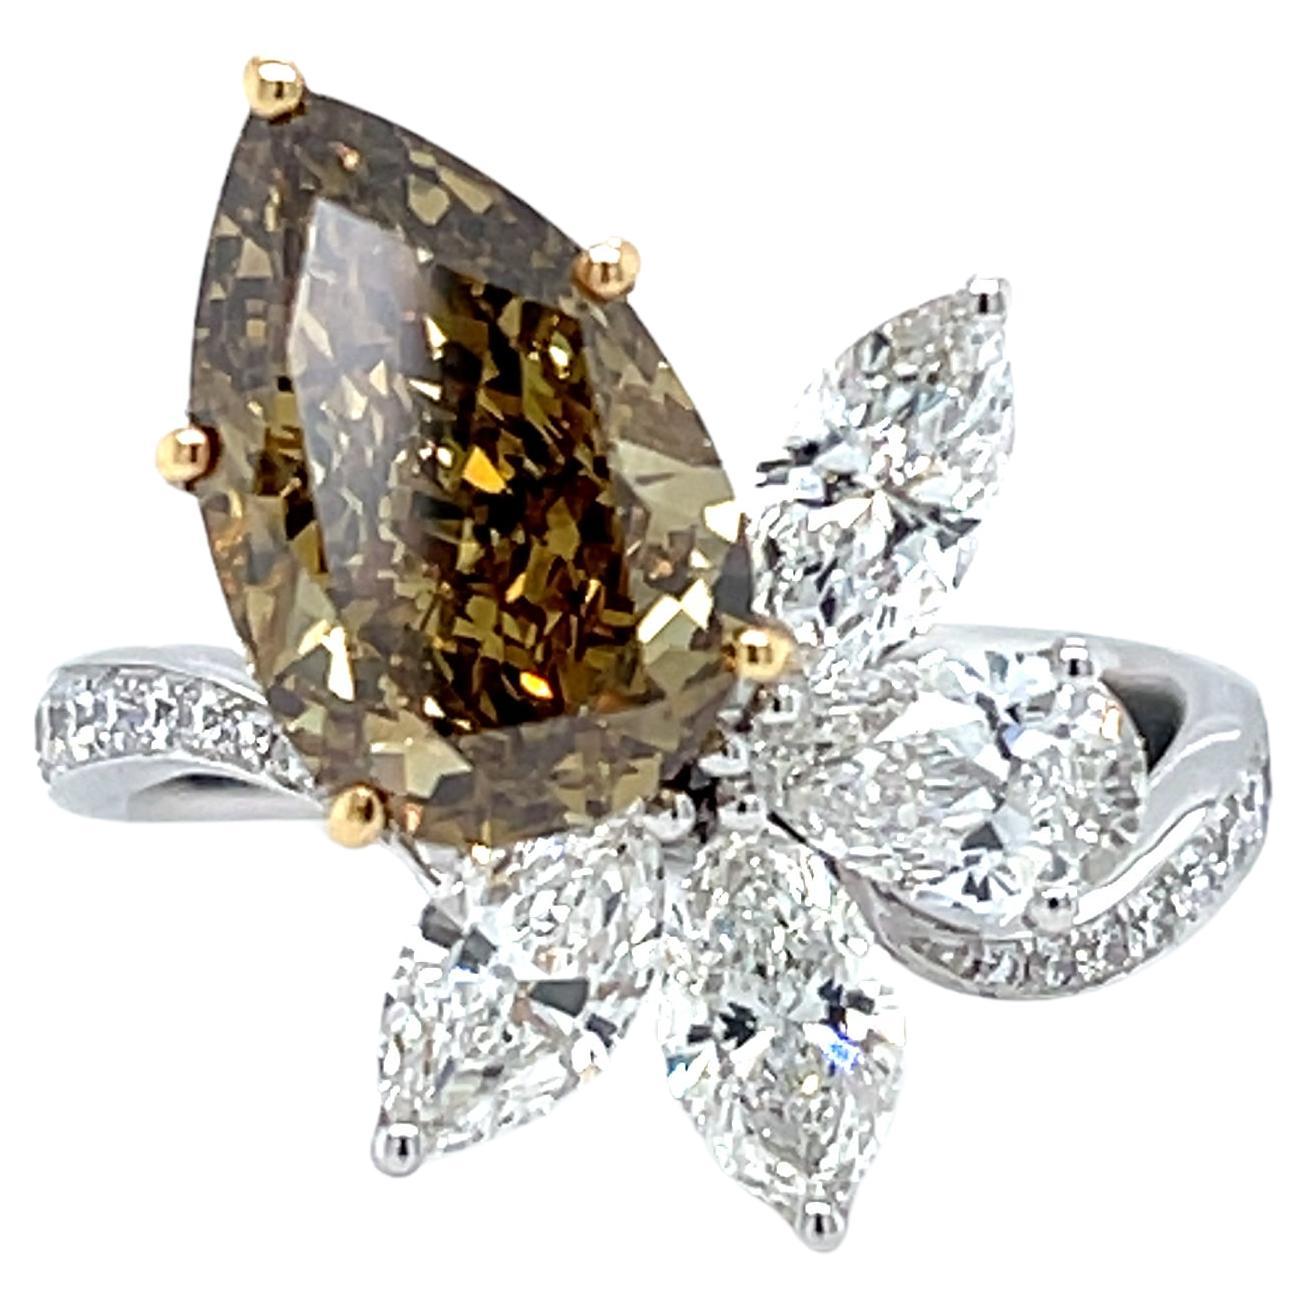 GIA Certified Brown-Yellow Pear Cut 3.12 Carat Diamond Ring in 18K Gold For Sale